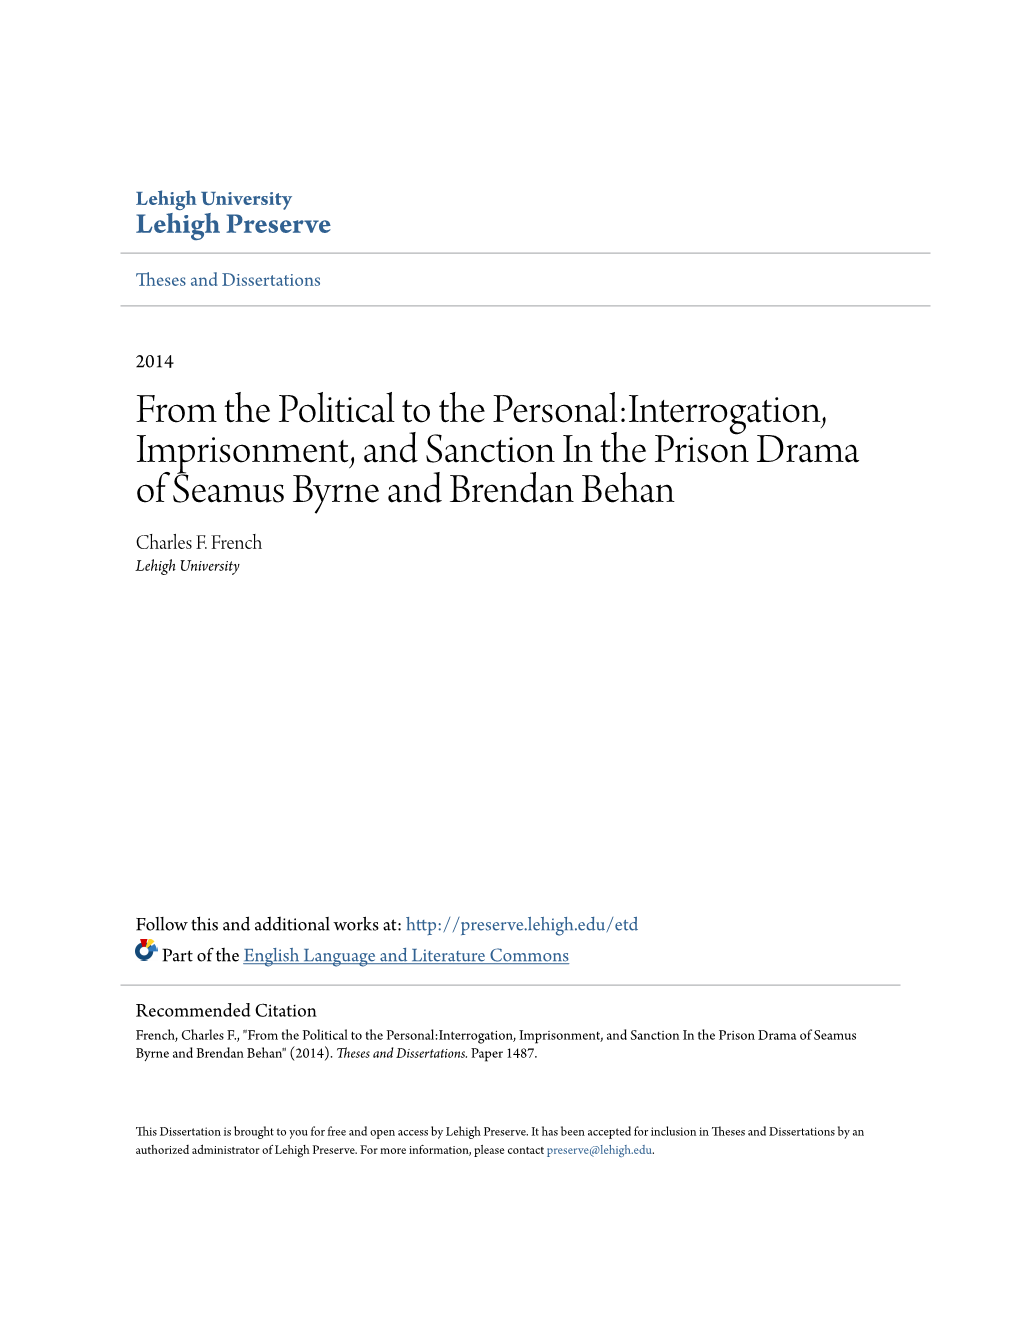 From the Political to the Personal:Interrogation, Imprisonment, and Sanction in the Prison Drama of Seamus Byrne and Brendan Behan Charles F